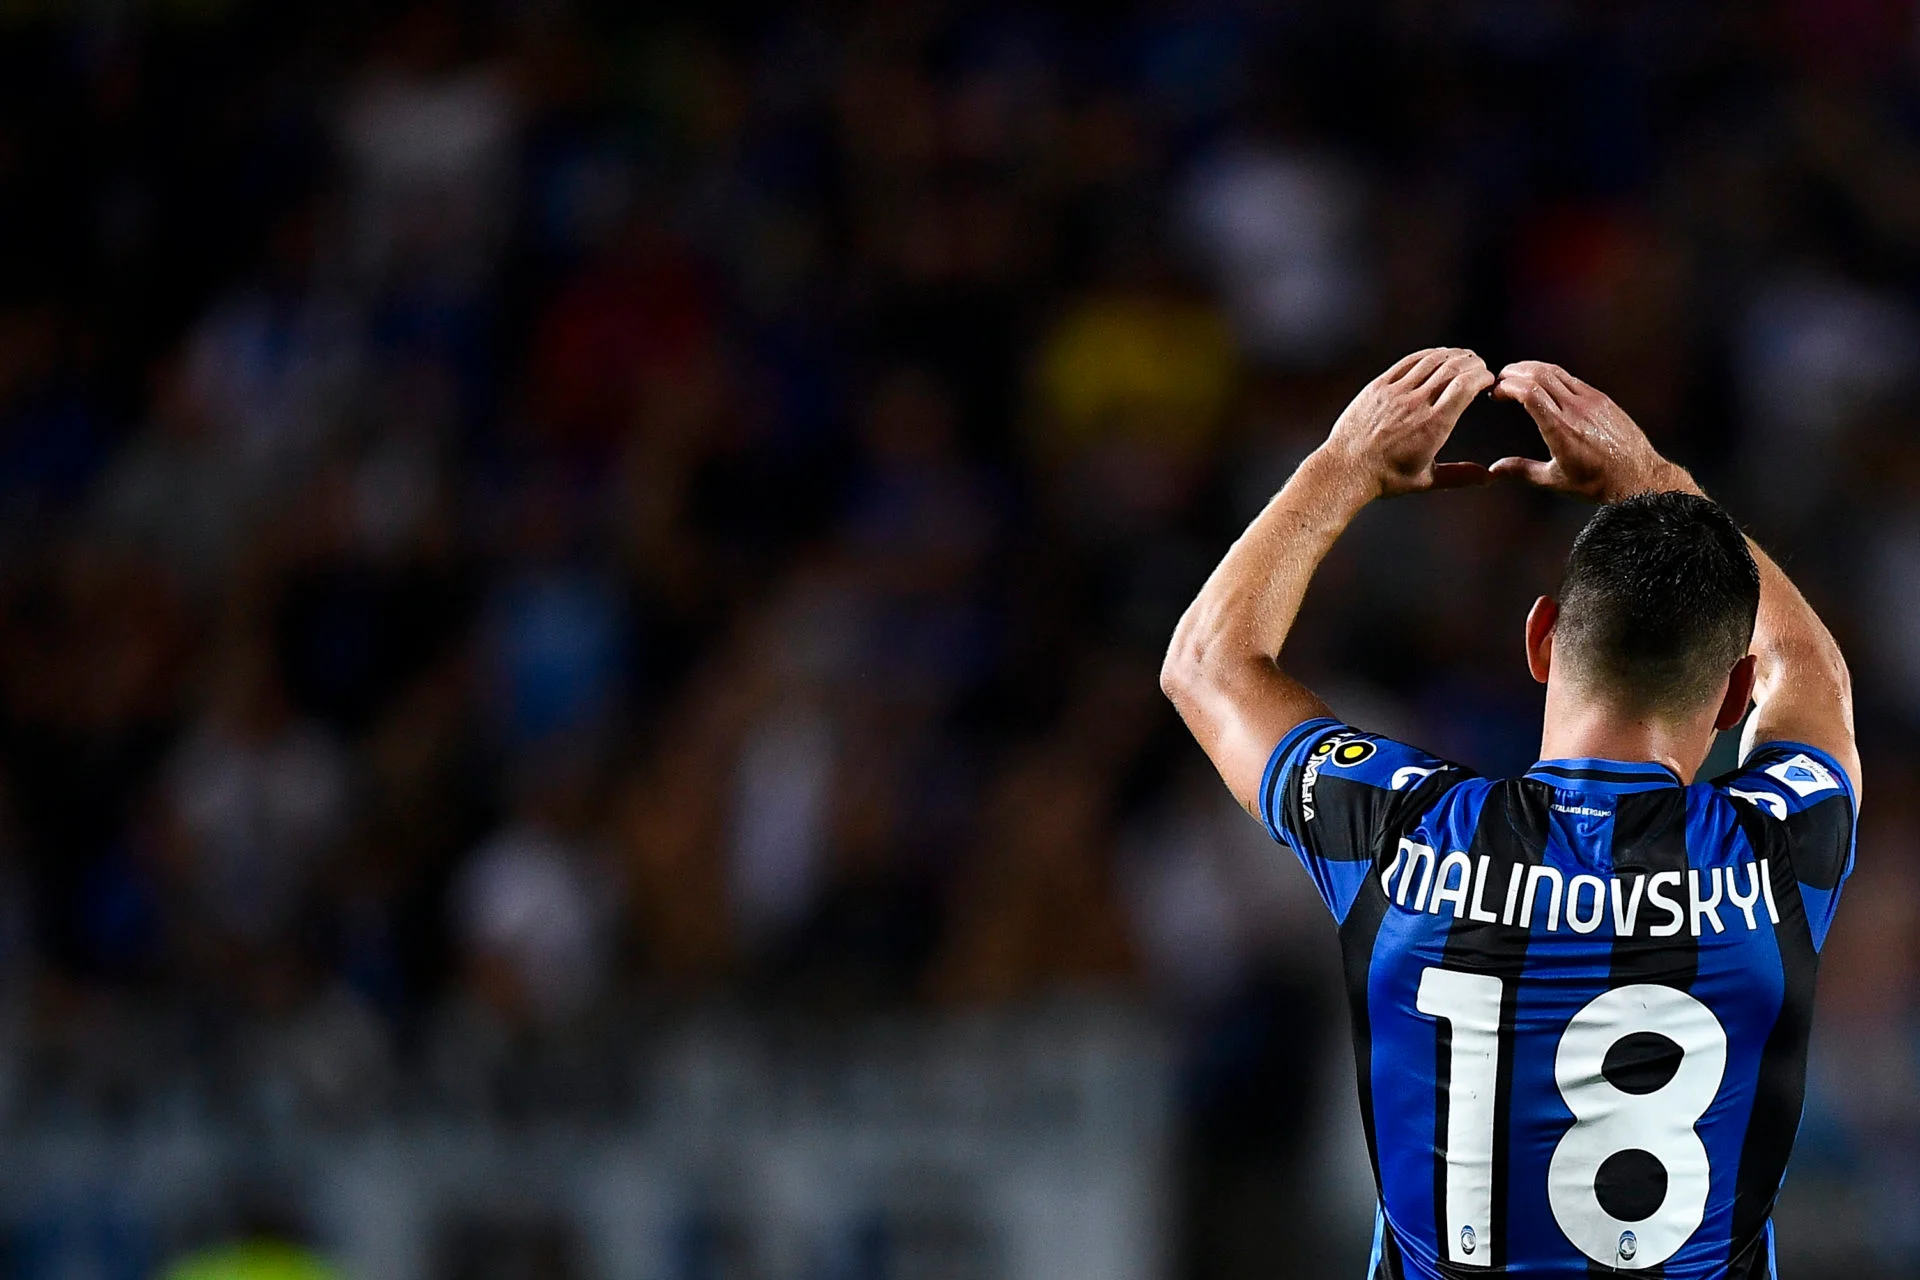 Ex-Atalanta winger Malinovskyi has agreed to join Genoa on a loan deal with the option to make it a permanent move for €10M, avoiding Monza and Bologna.